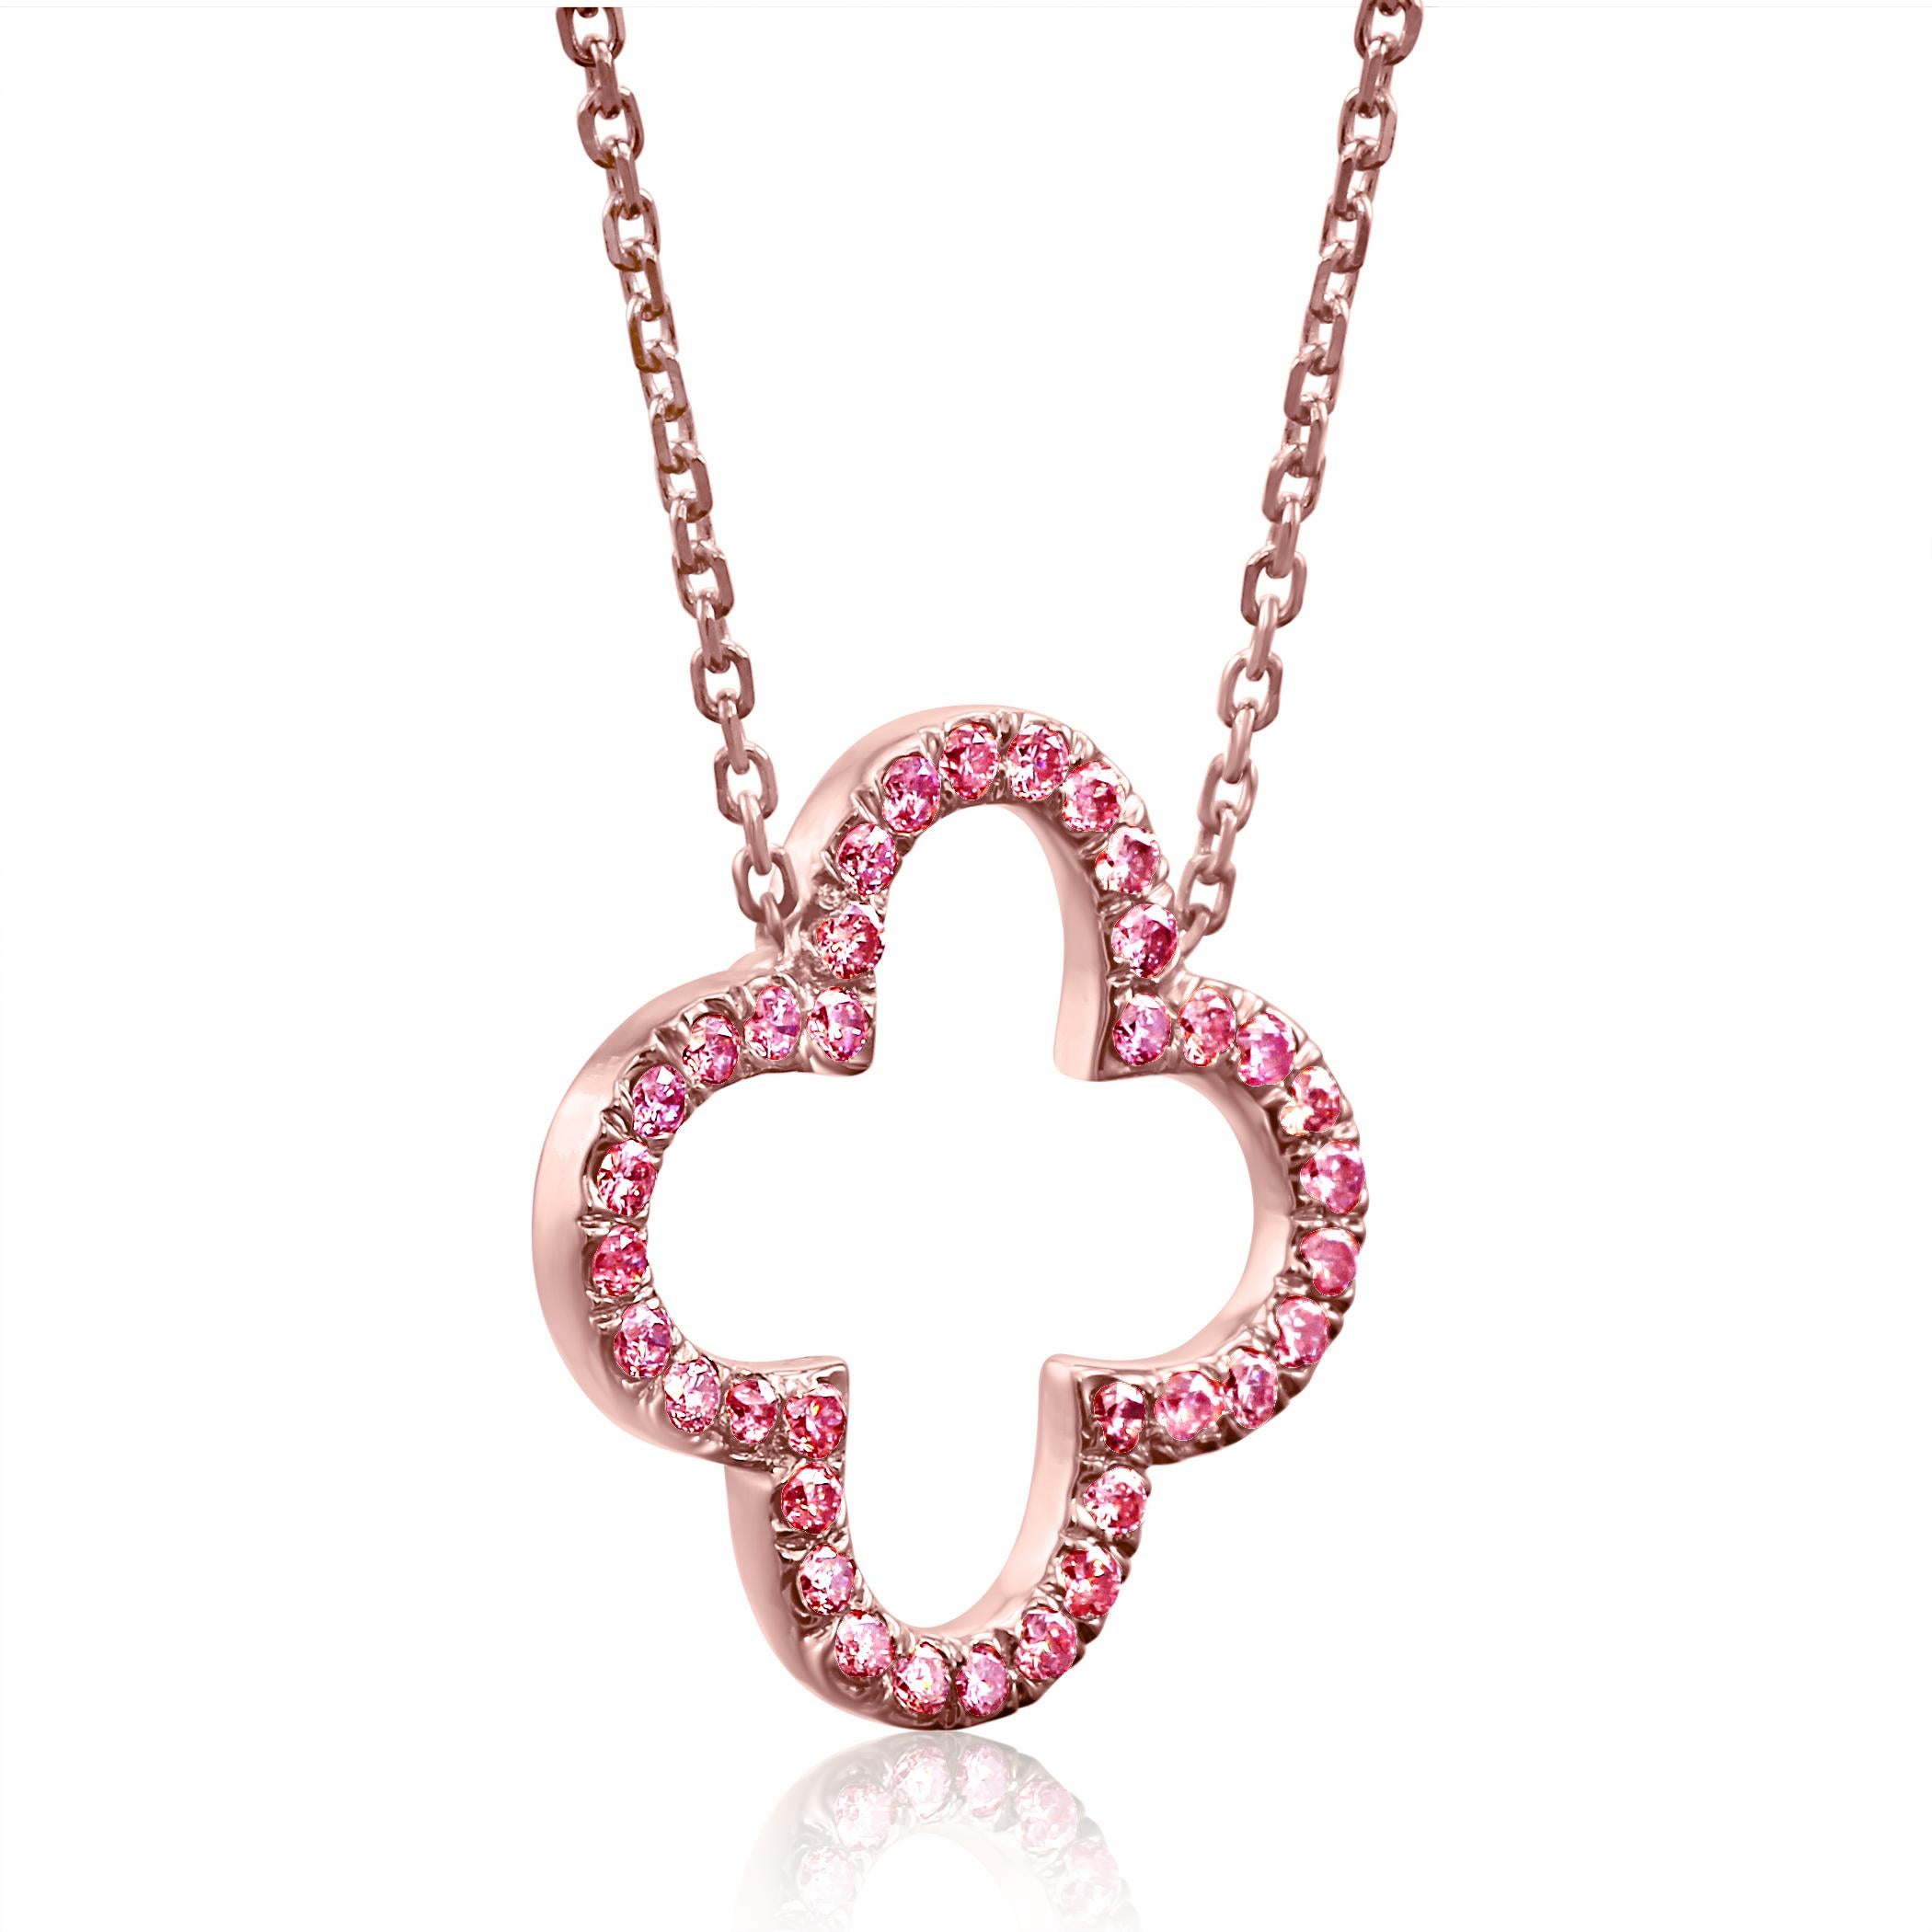 Stunning Natural Fancy Pink Diamonds Rounds SI Clarity 0.40 Carat set in 14K Rose Gold Pendant Necklace.

Made in USA

Also available in White Gold and Yellow Gold with white and Yellow Diamonds